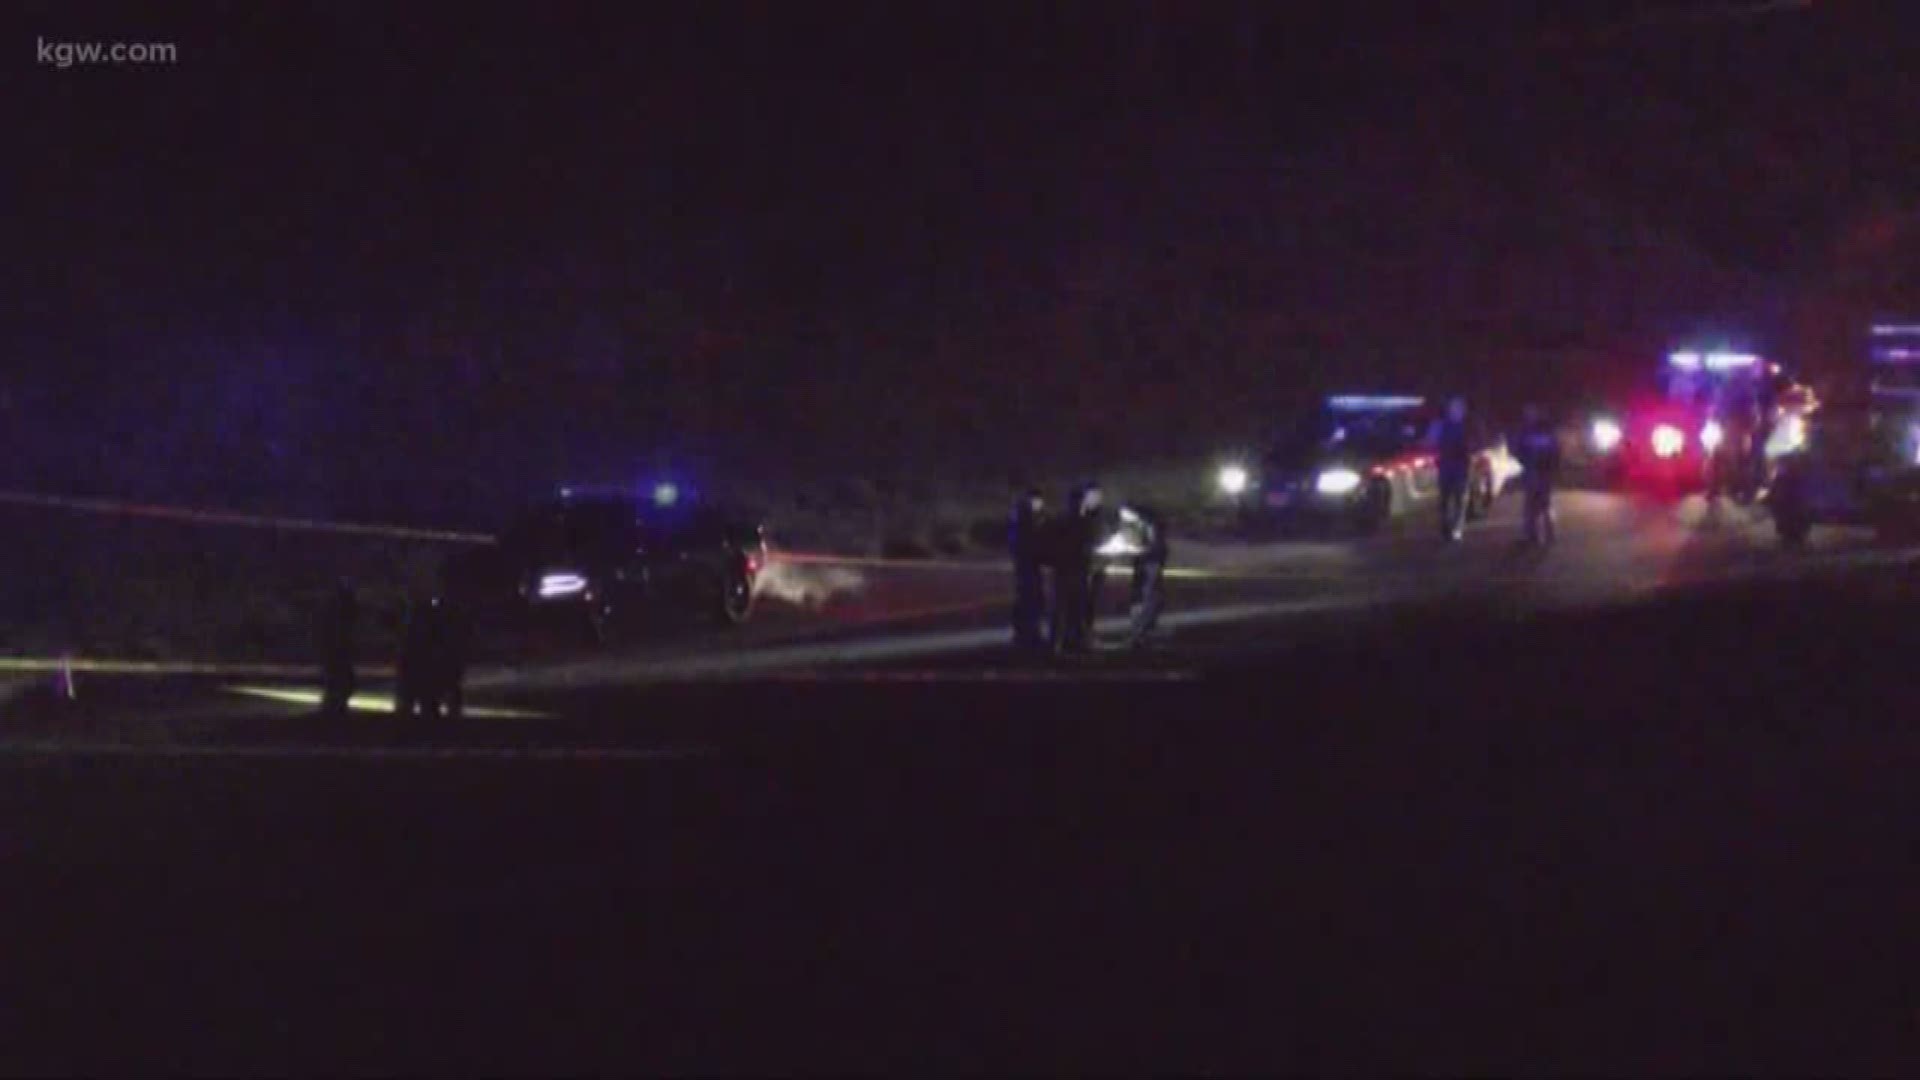 A person is dead after an officer-involved shooting late Thursday night on Interstate 5 south of Salem, according to the Oregon State Police.